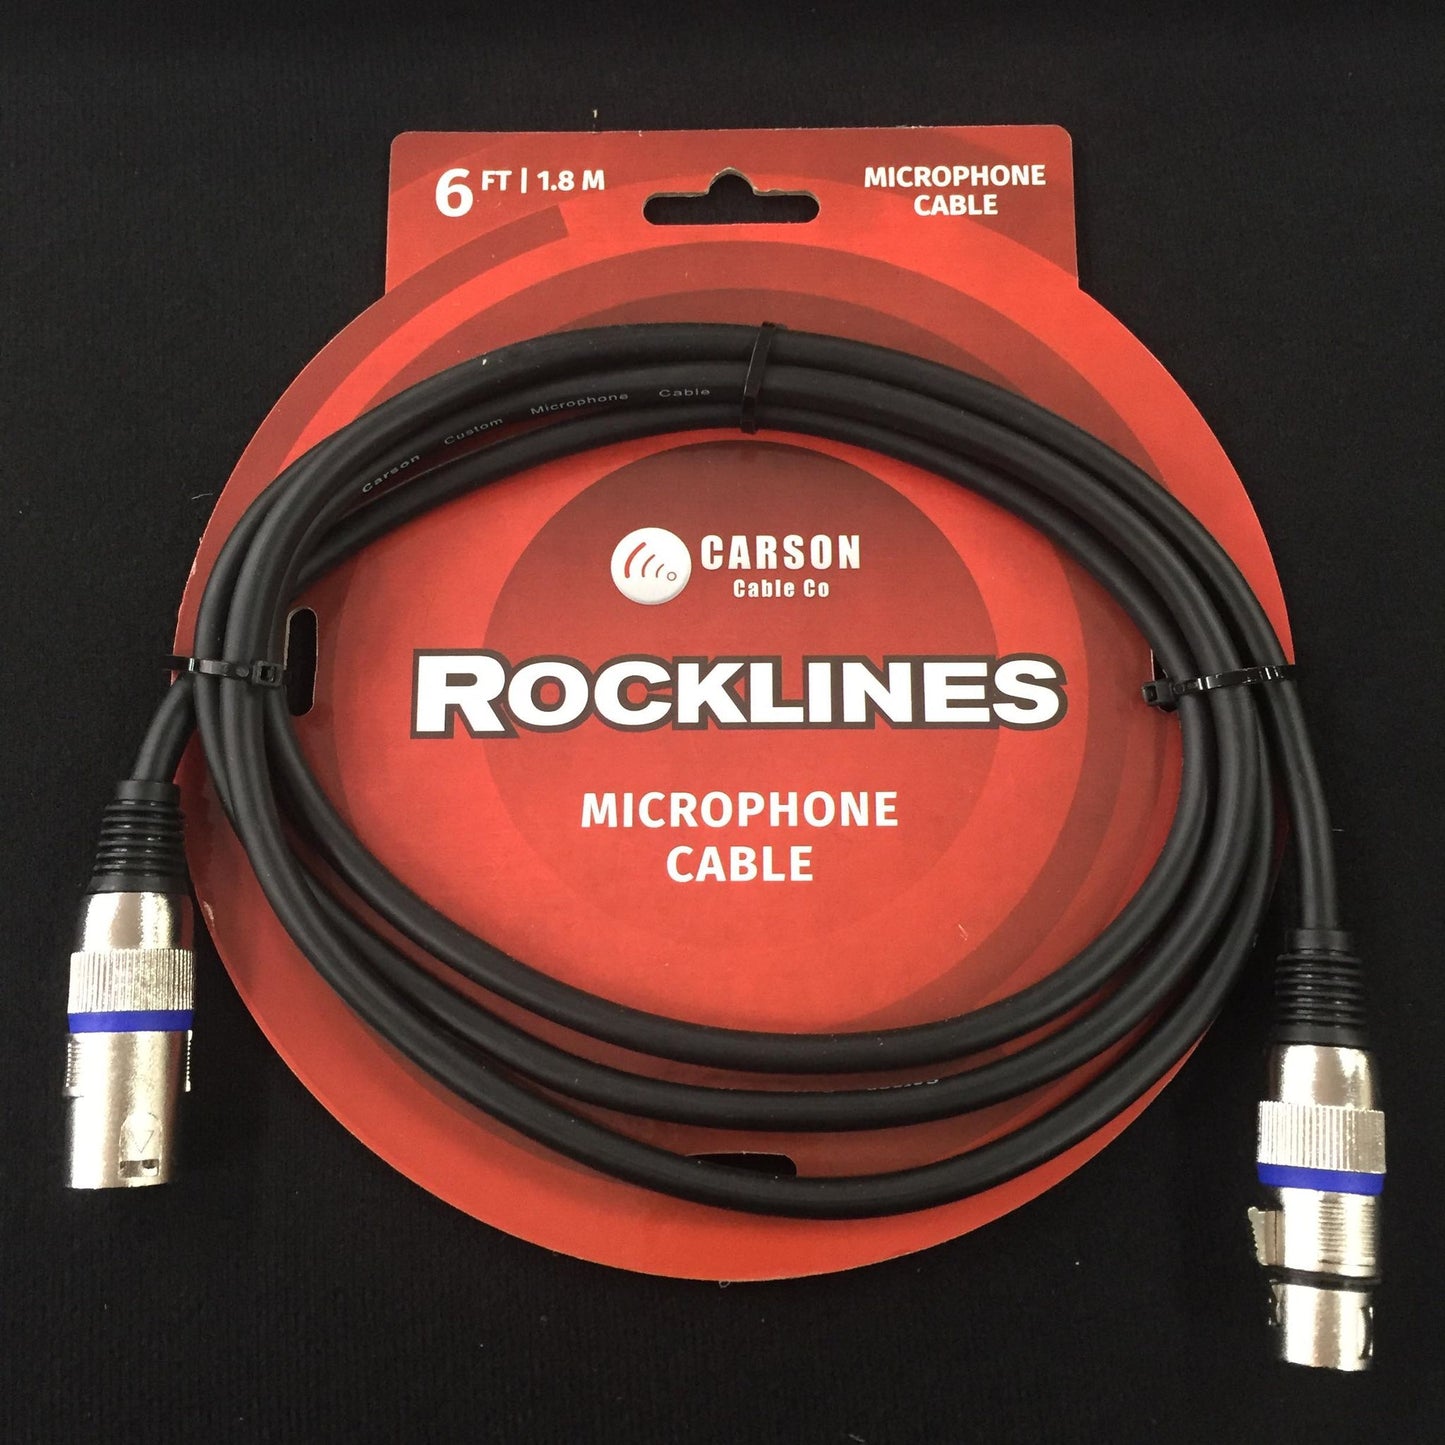 Carson Rocklines 6ft Microphone Cable